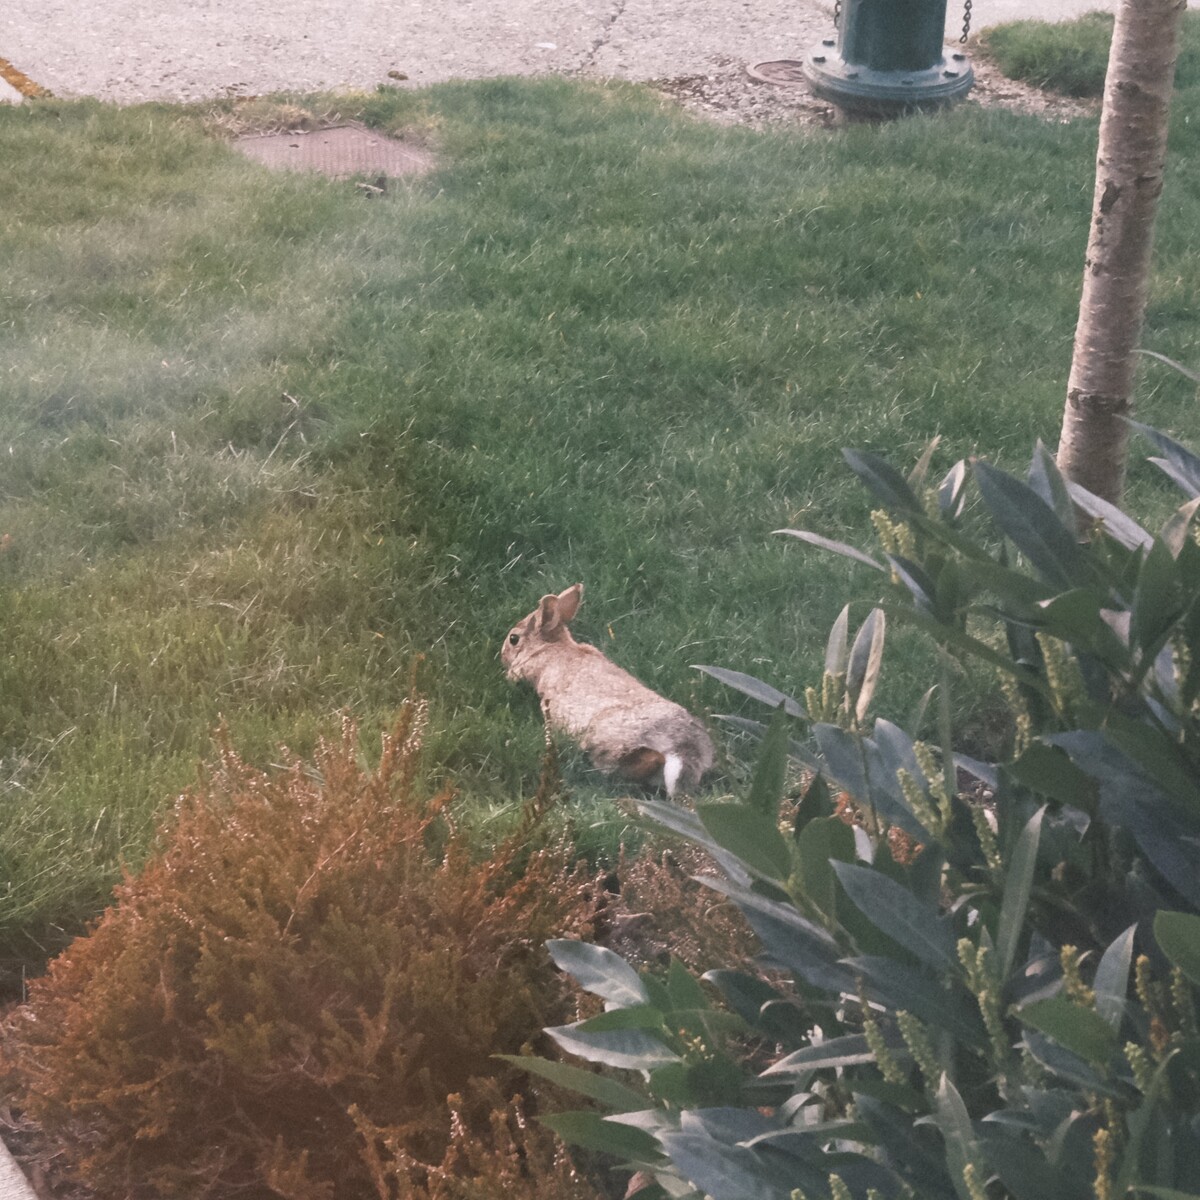 A bunny lounging in the garden.